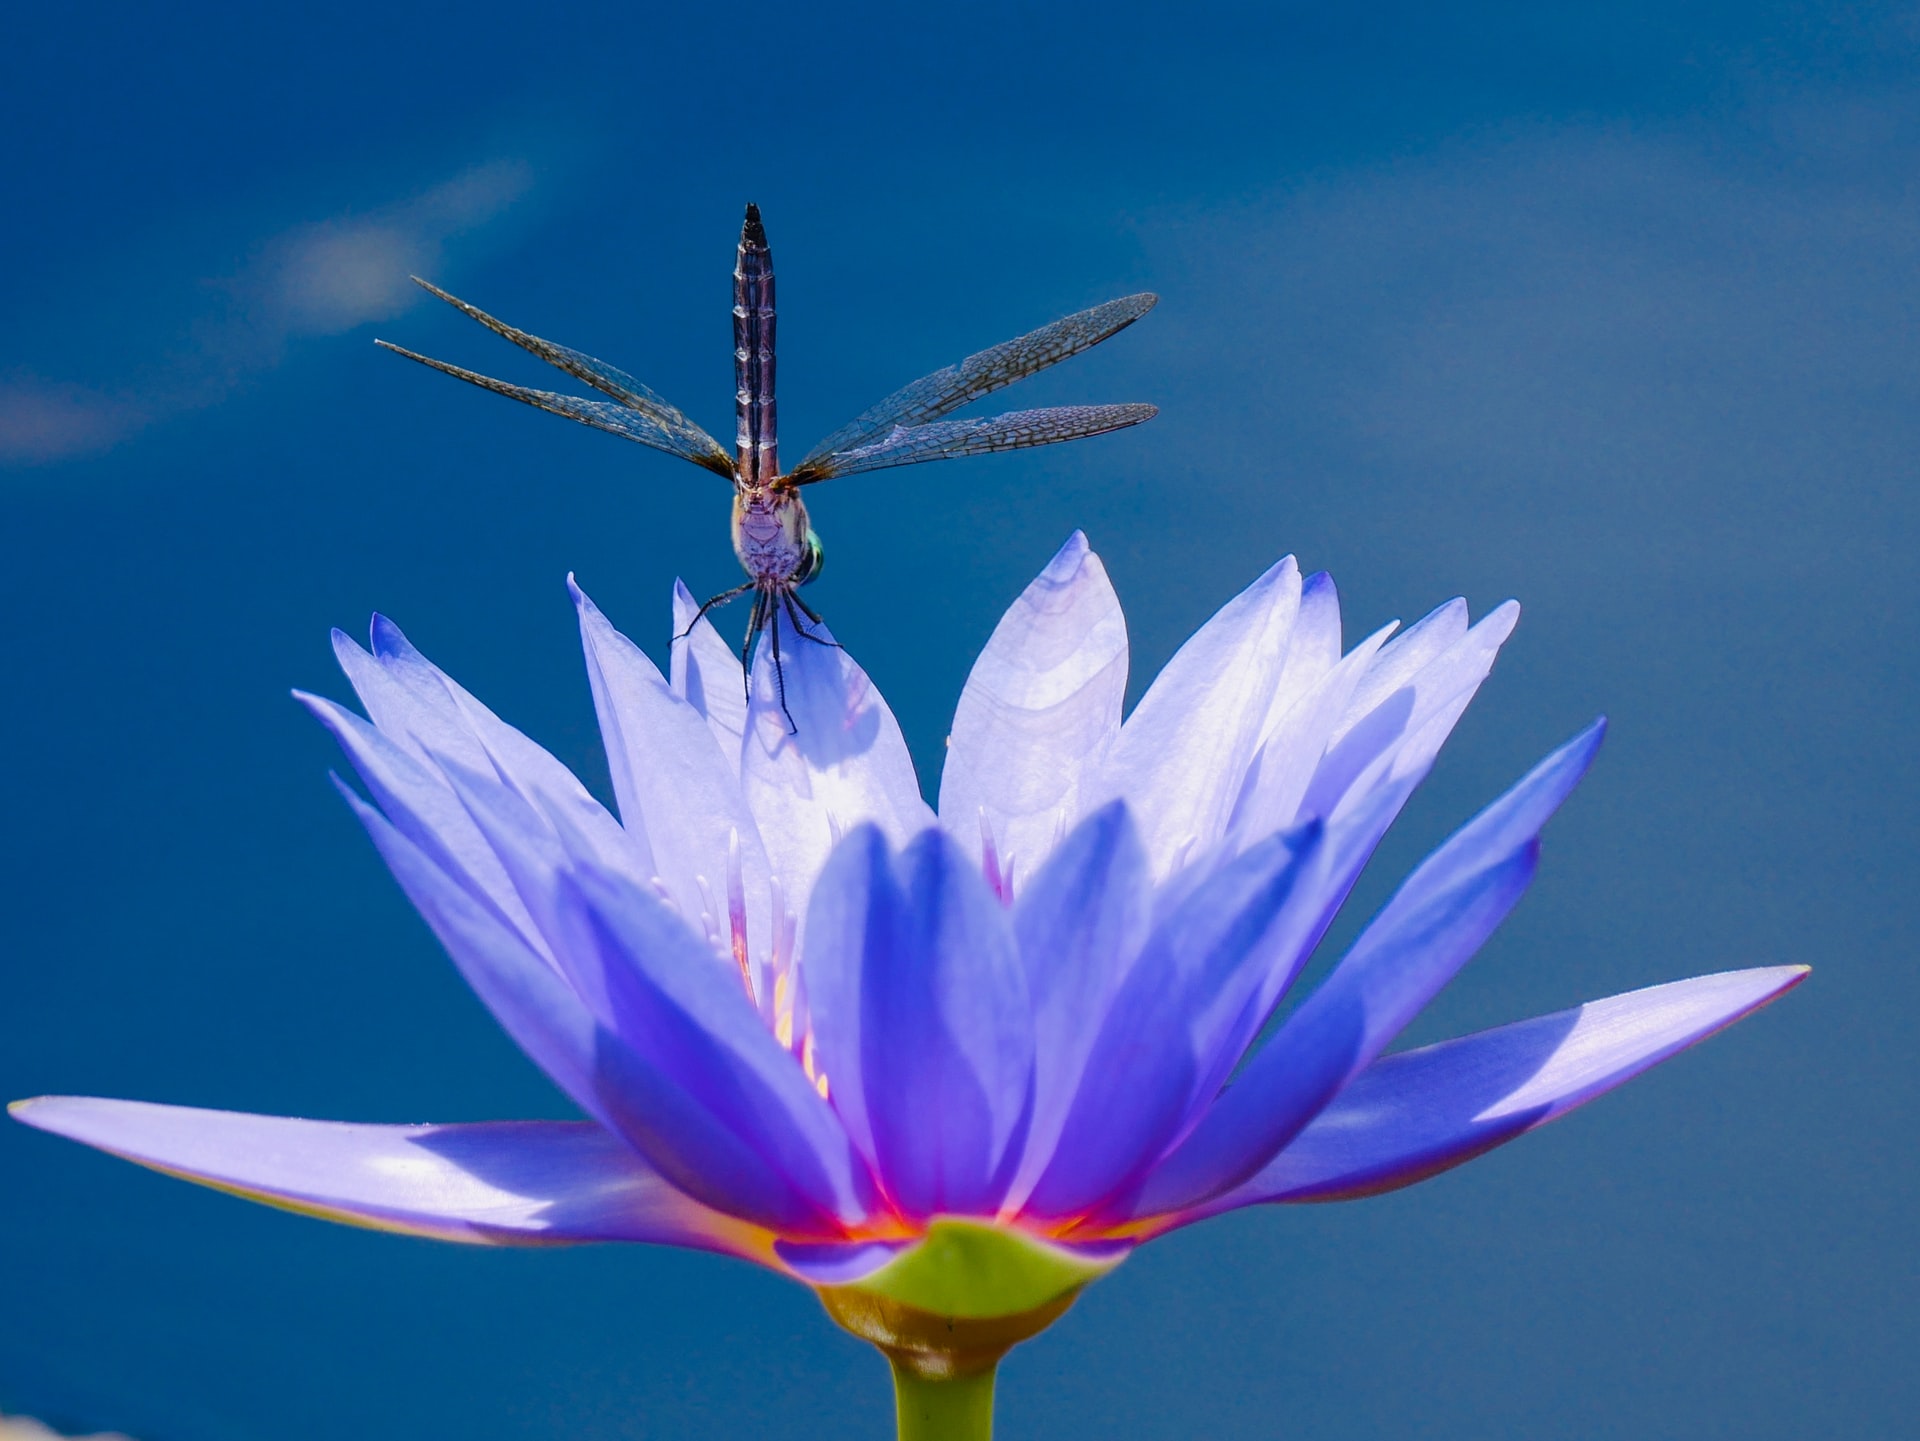 A dragonfly on a flower